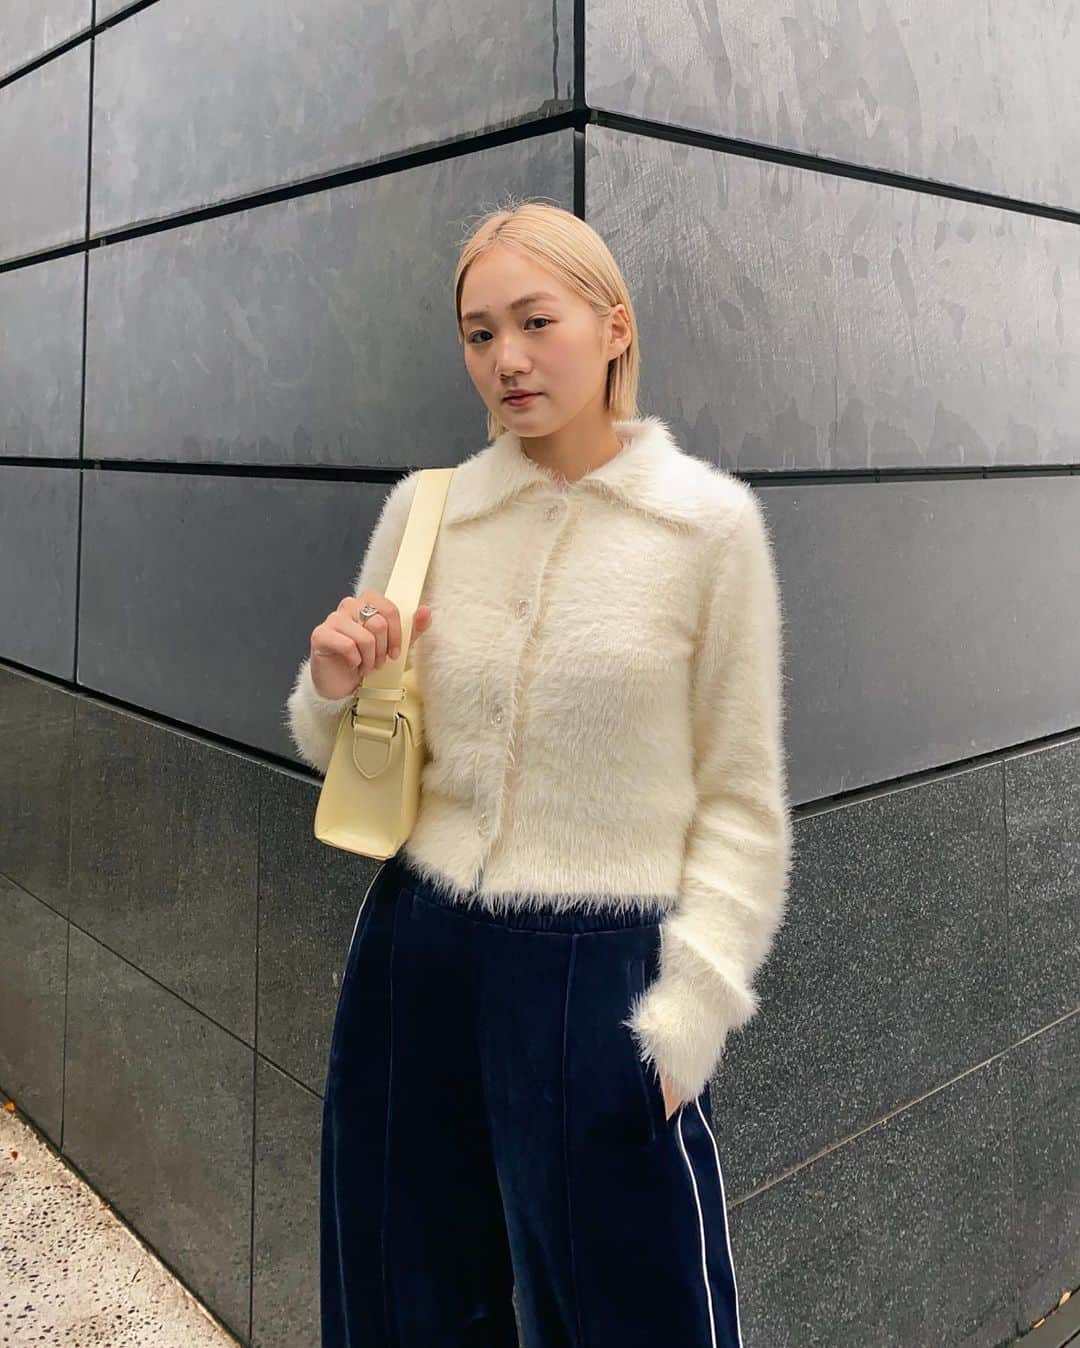 MOUSSY SNAPのインスタグラム：「#MOUSSYSNAP  -KNIT TOPIX PRICE FAIR- 今すぐ使えるニットアイテムをお得にゲット。  ・FAUX PEARL BUTTON STAND FRILL CARDIGAN(010GA270-6330) ・CROPPED STITCHING KNIT(010GAG70-5730) ・OVERSIZED CARDIGAN(010GA770-6760) ・FEATHER YARN KNIT SHIRT(010GAS70-6180) 全国のMOUSSY店舗／SHEL'TTER WEBSTORE／ZOZOTOWNにて発売中。  #MOUSSY」